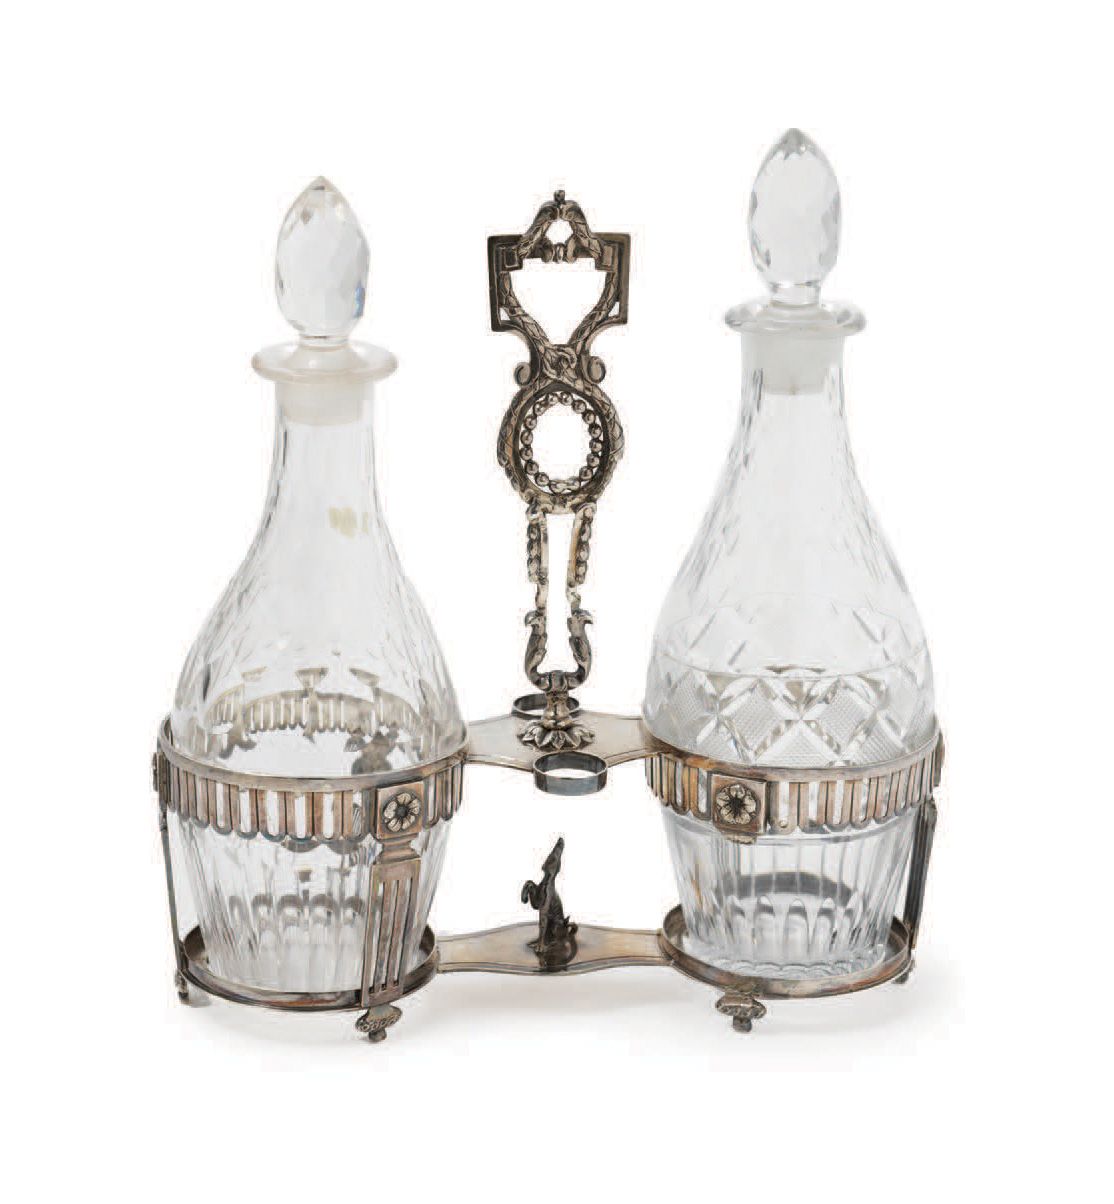 Null SILVER OIL BOILER AND ITS TWO CARAFES Antwerp, 1791
Date stamp : 91, Master&hellip;